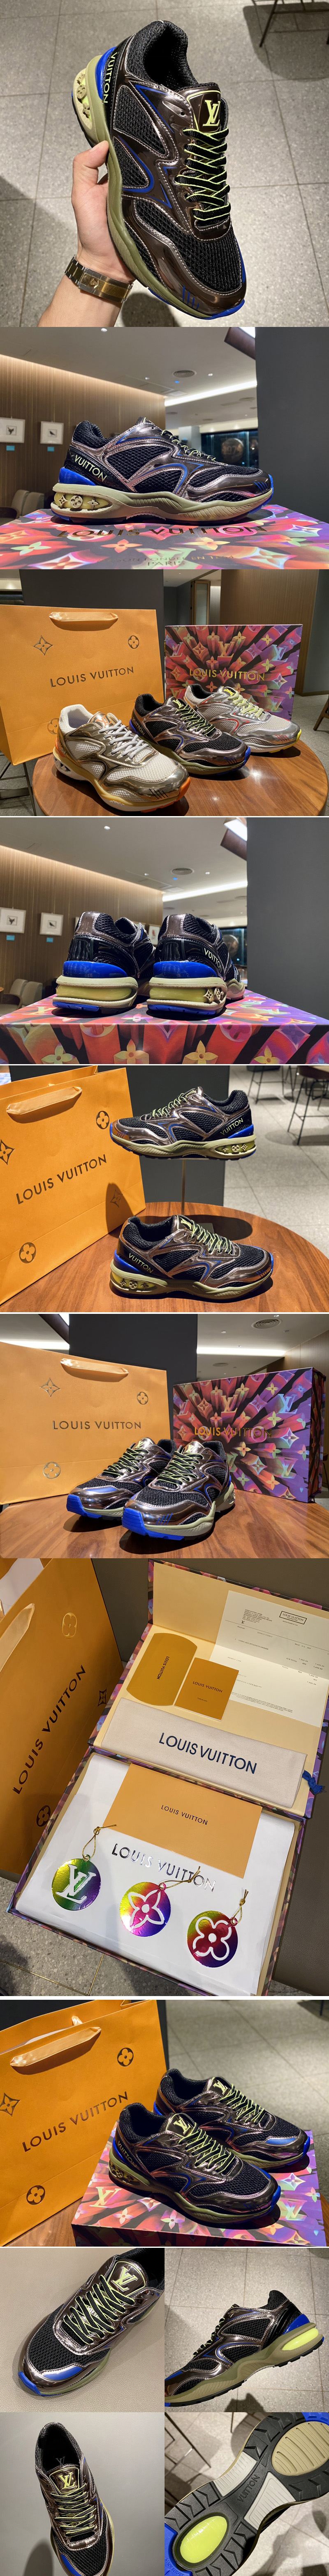 Replica Louis Vuitton 1A7WKH LV Trail sneaker in Anthracite Gray Metallic leather and mesh